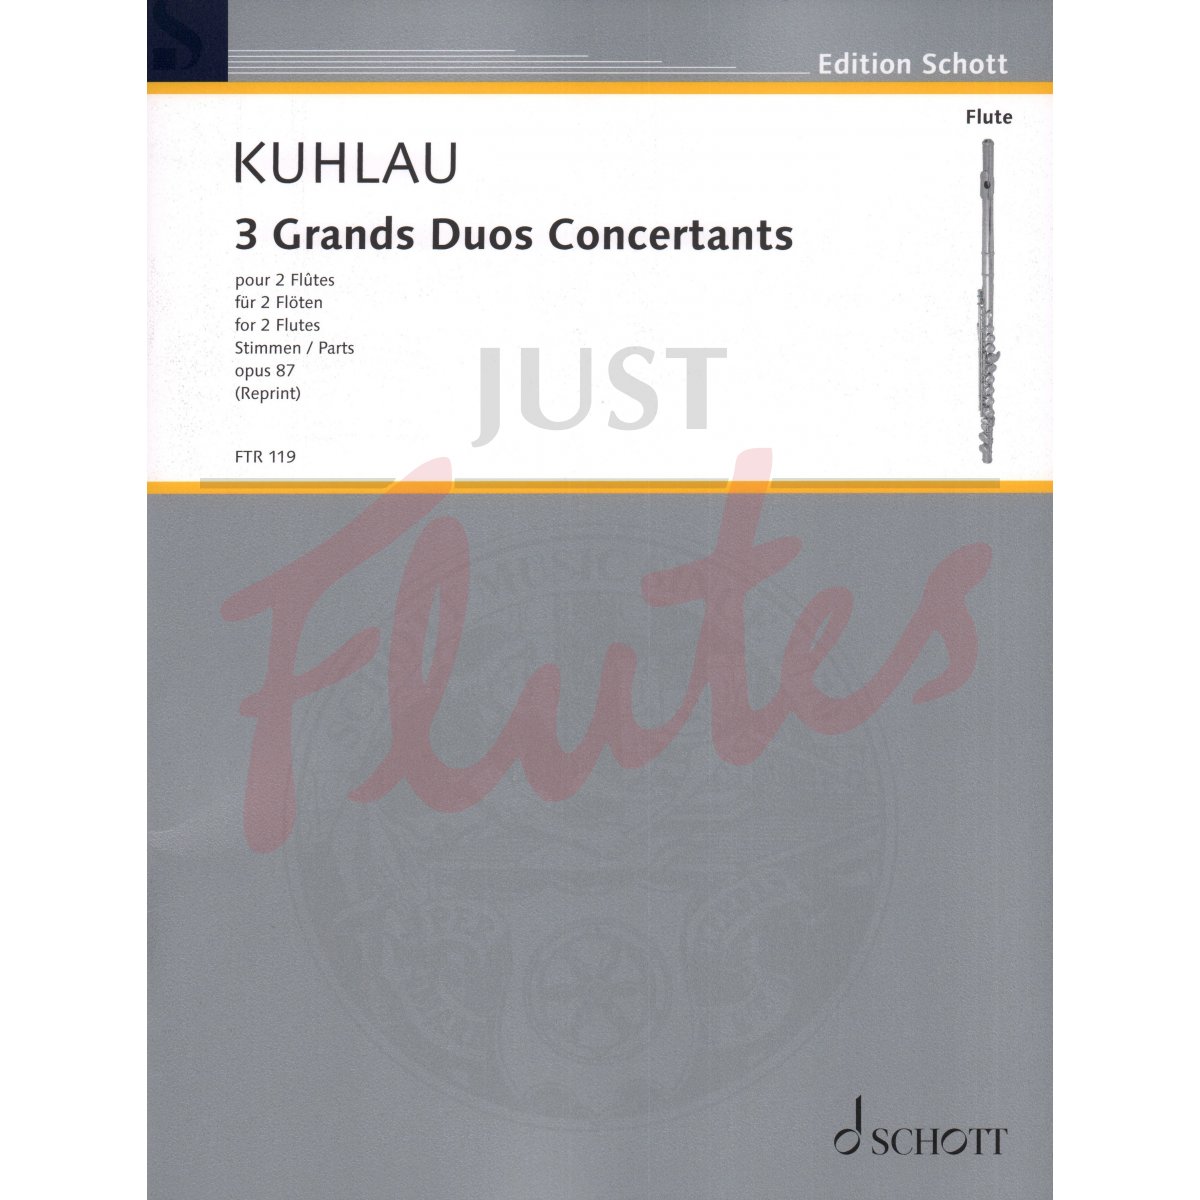 3 Grands Duos Concertants for Two Flutes